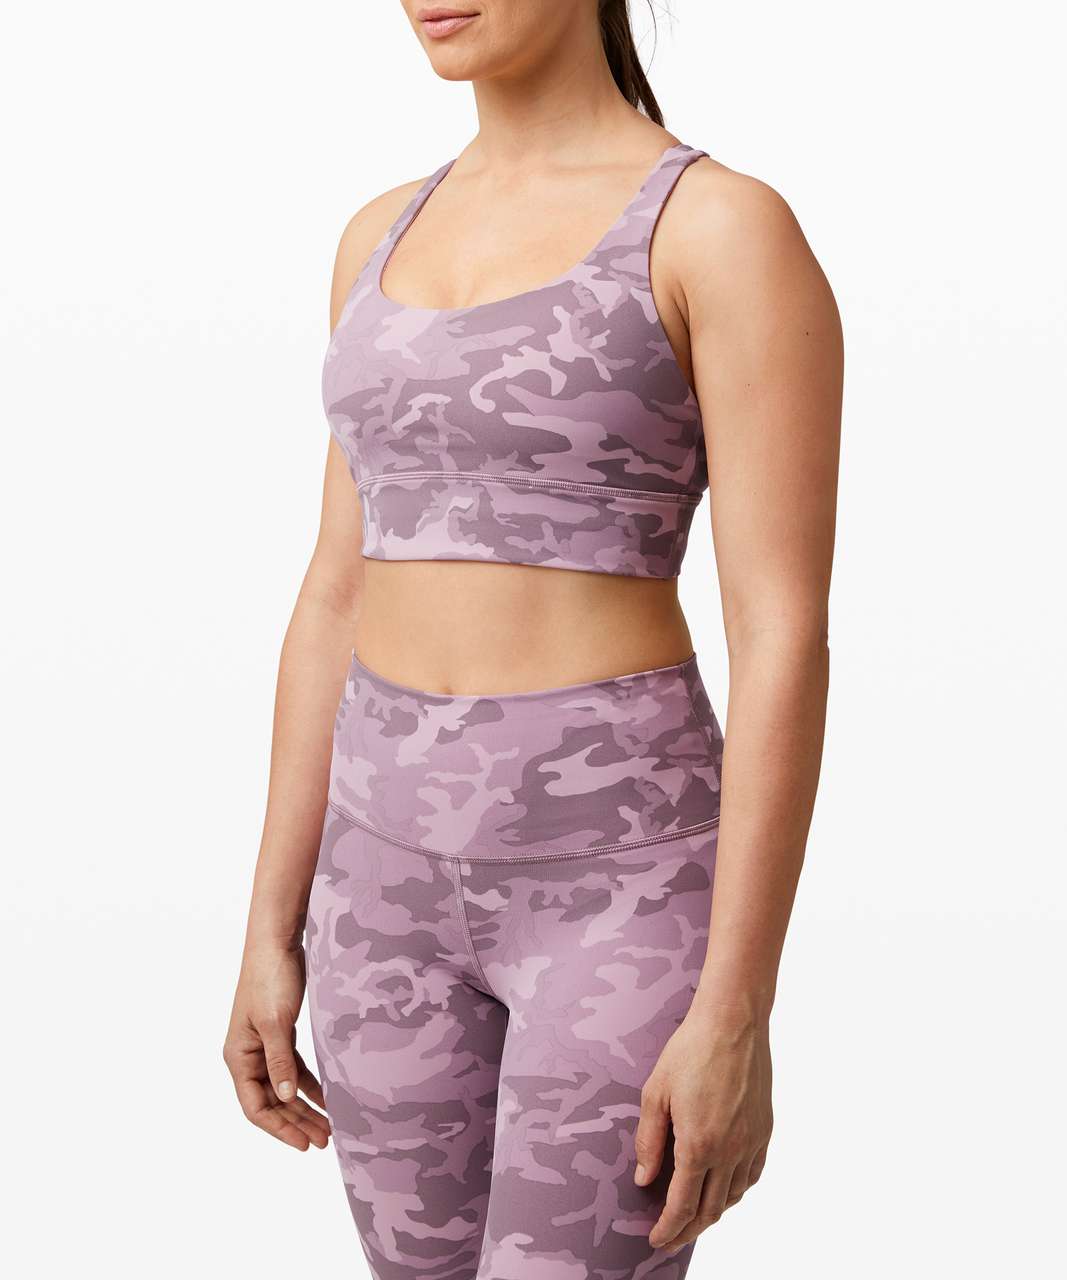 Lululemon Energy Bra Long Line *Medium Support, B-D Cup - Incognito Camo Pink Taupe Multi